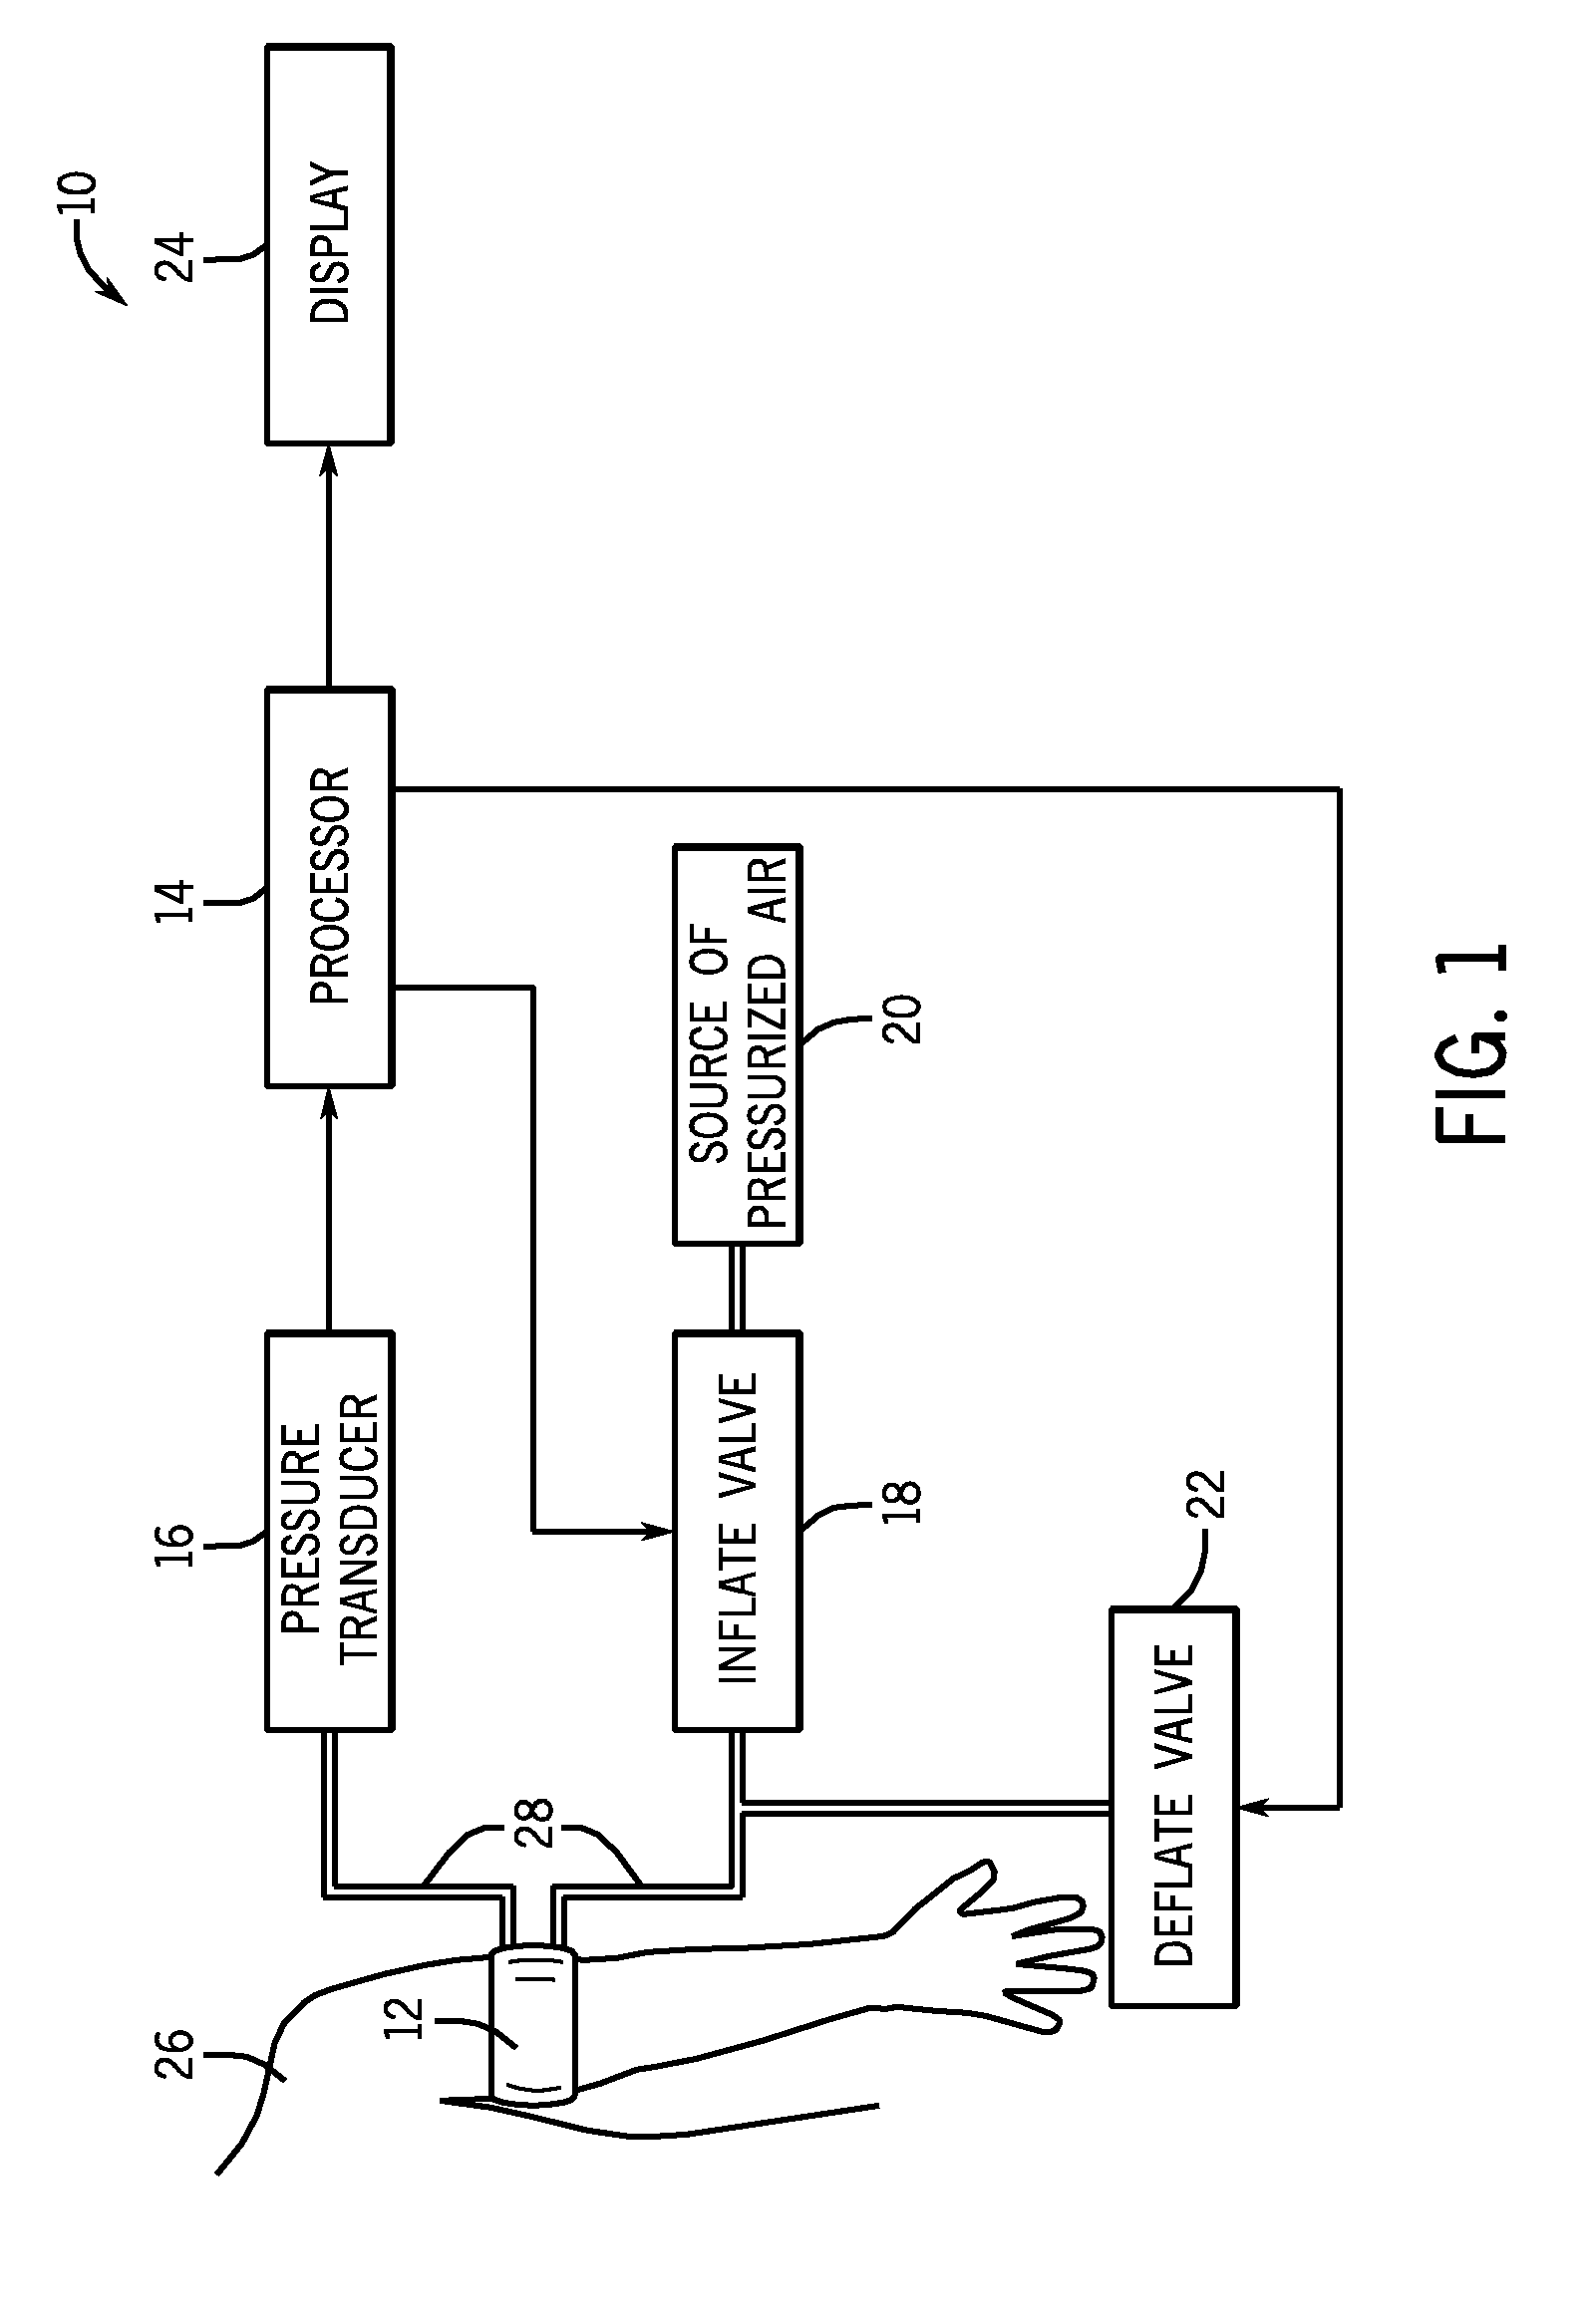 System and method for a non-invasive blood pressure monitor